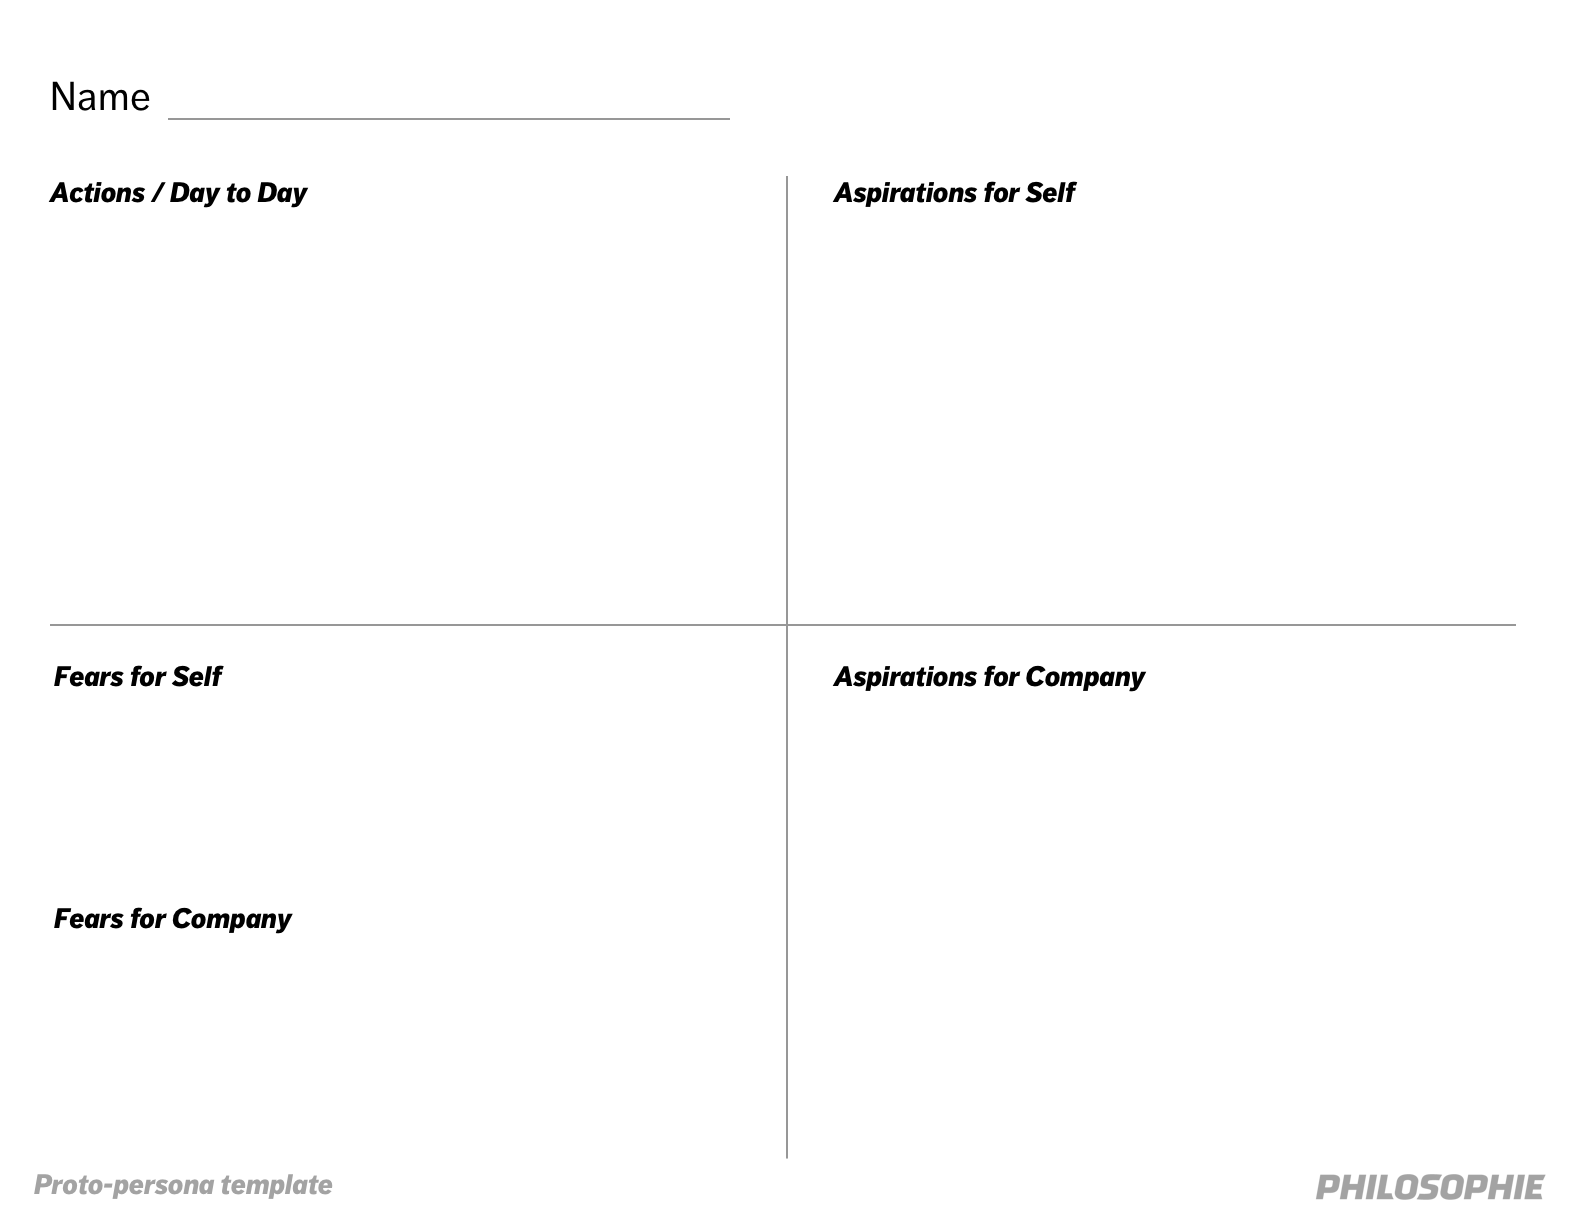 Stakeholder persona template